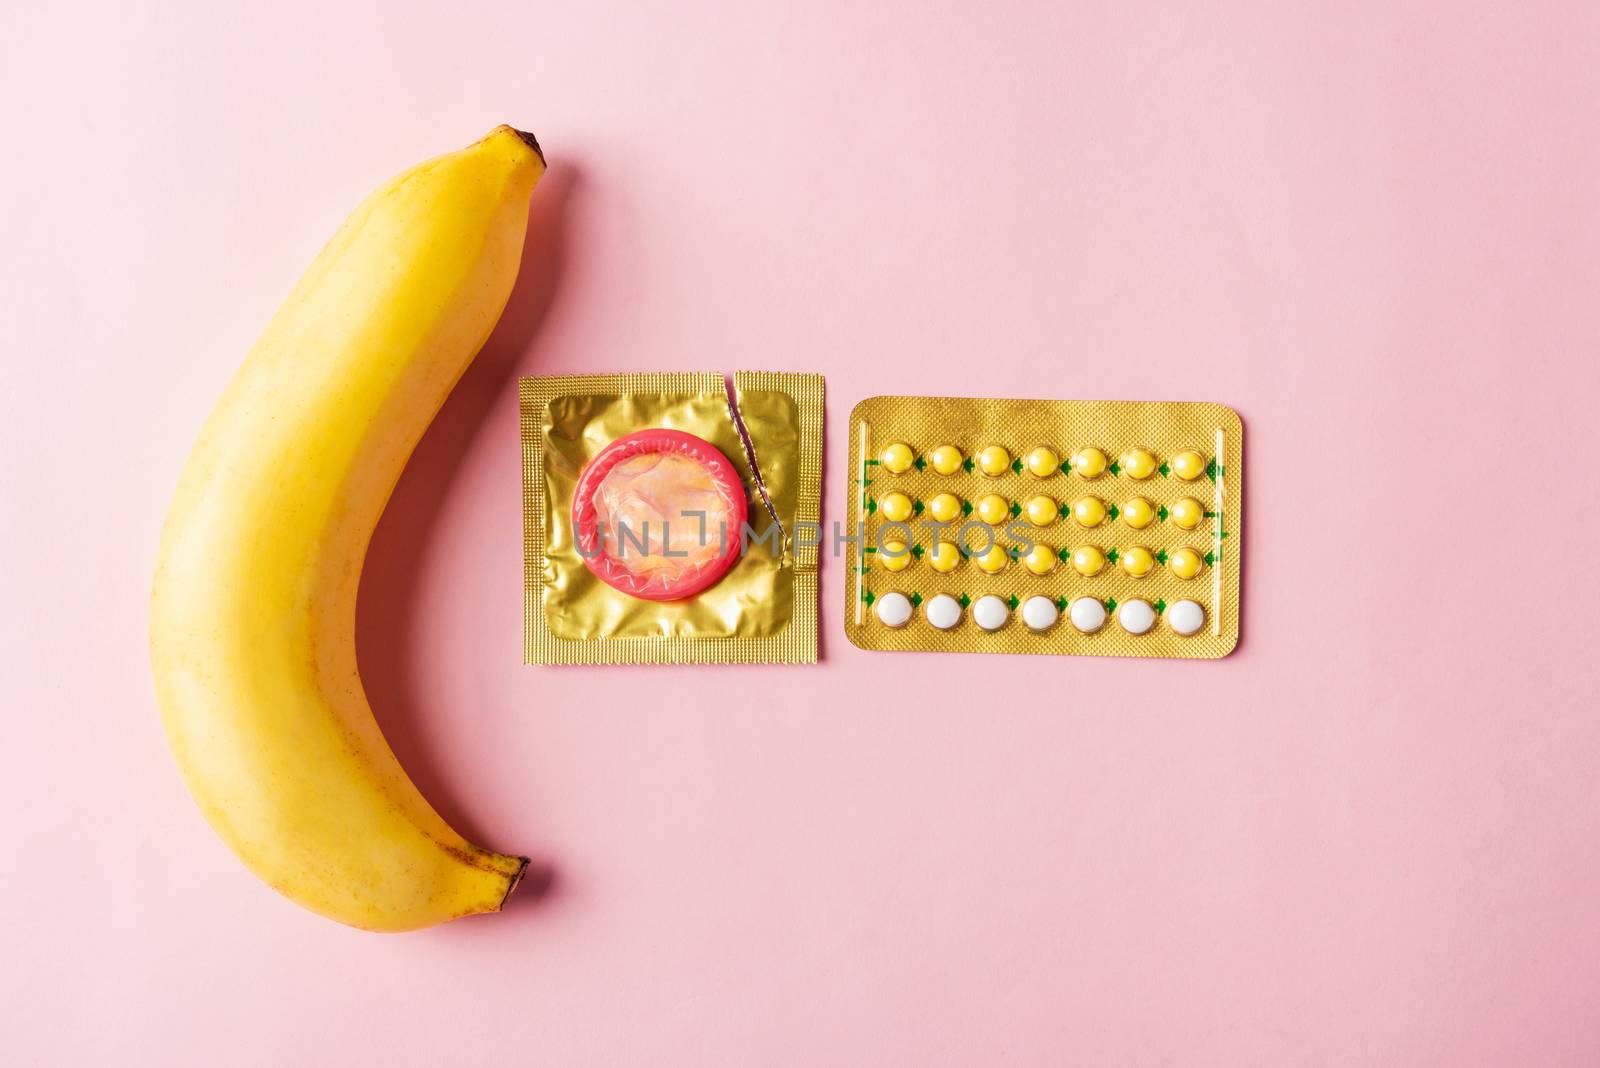 condom on wrapper pack, banana and contraceptive pill by Sorapop